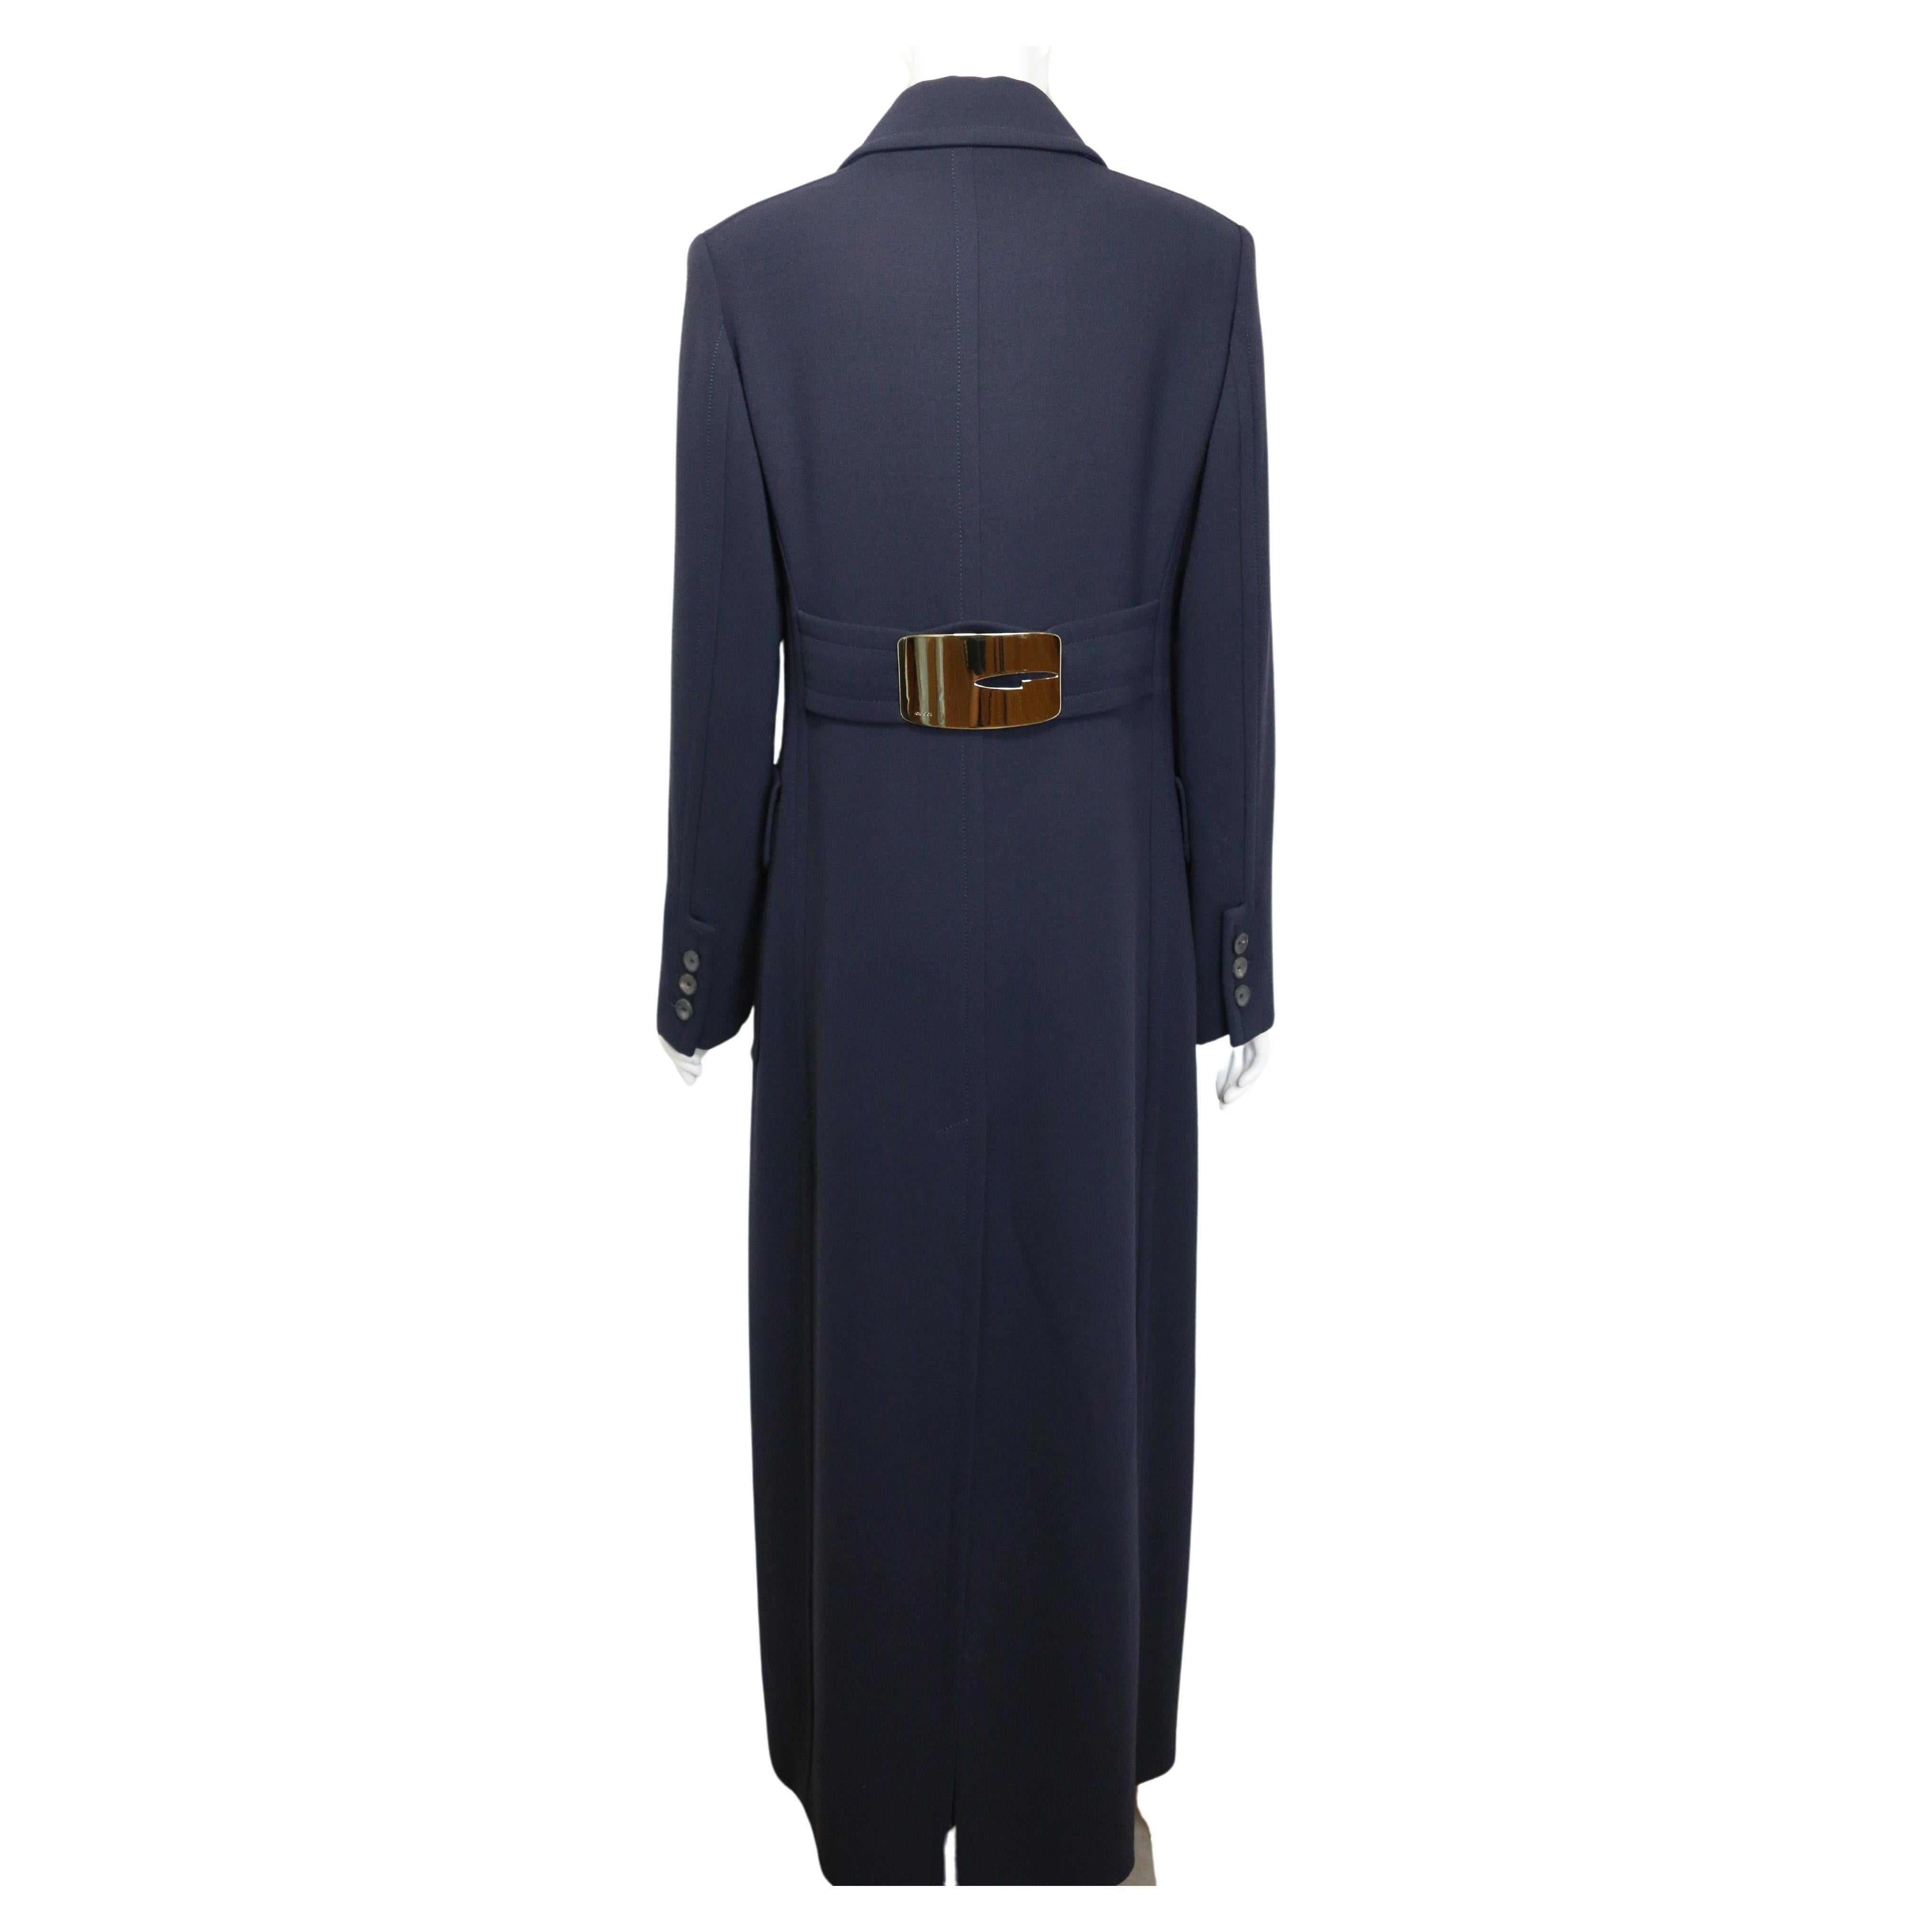 -  Unworn Gucci by Tom Ford Navy Wool Maxi Coat from Fall 1996 collection. Featuring a seasonal signature gold buckle at the back. 

- Featuring epaulettes on the shoulders, a hook fastening on the collar, eight front buttons, zipper closure, three